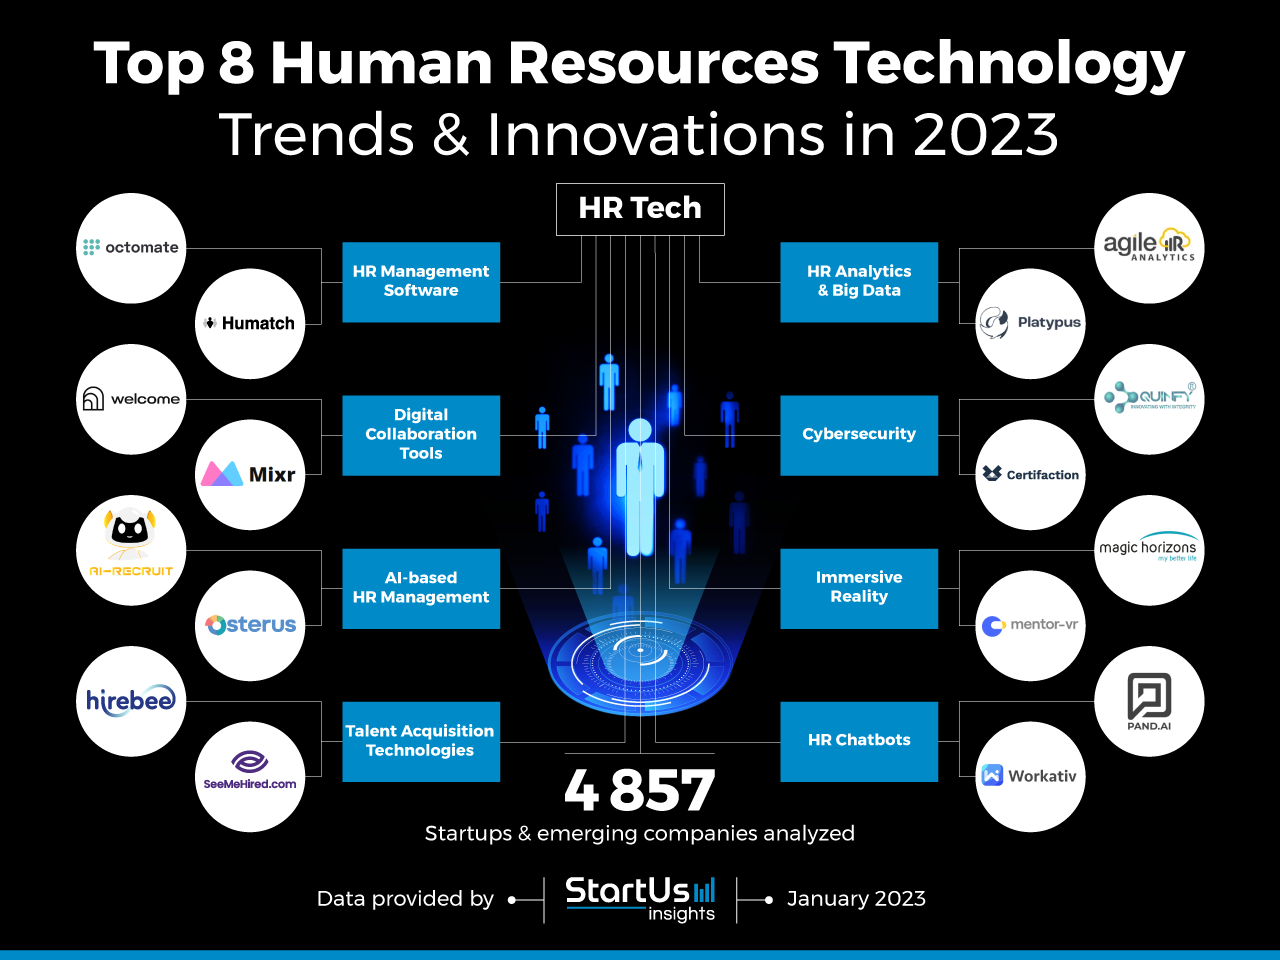 Human-Resources-Technology-trends-innovation-InnovationMap-StartUs-Insights-noresize